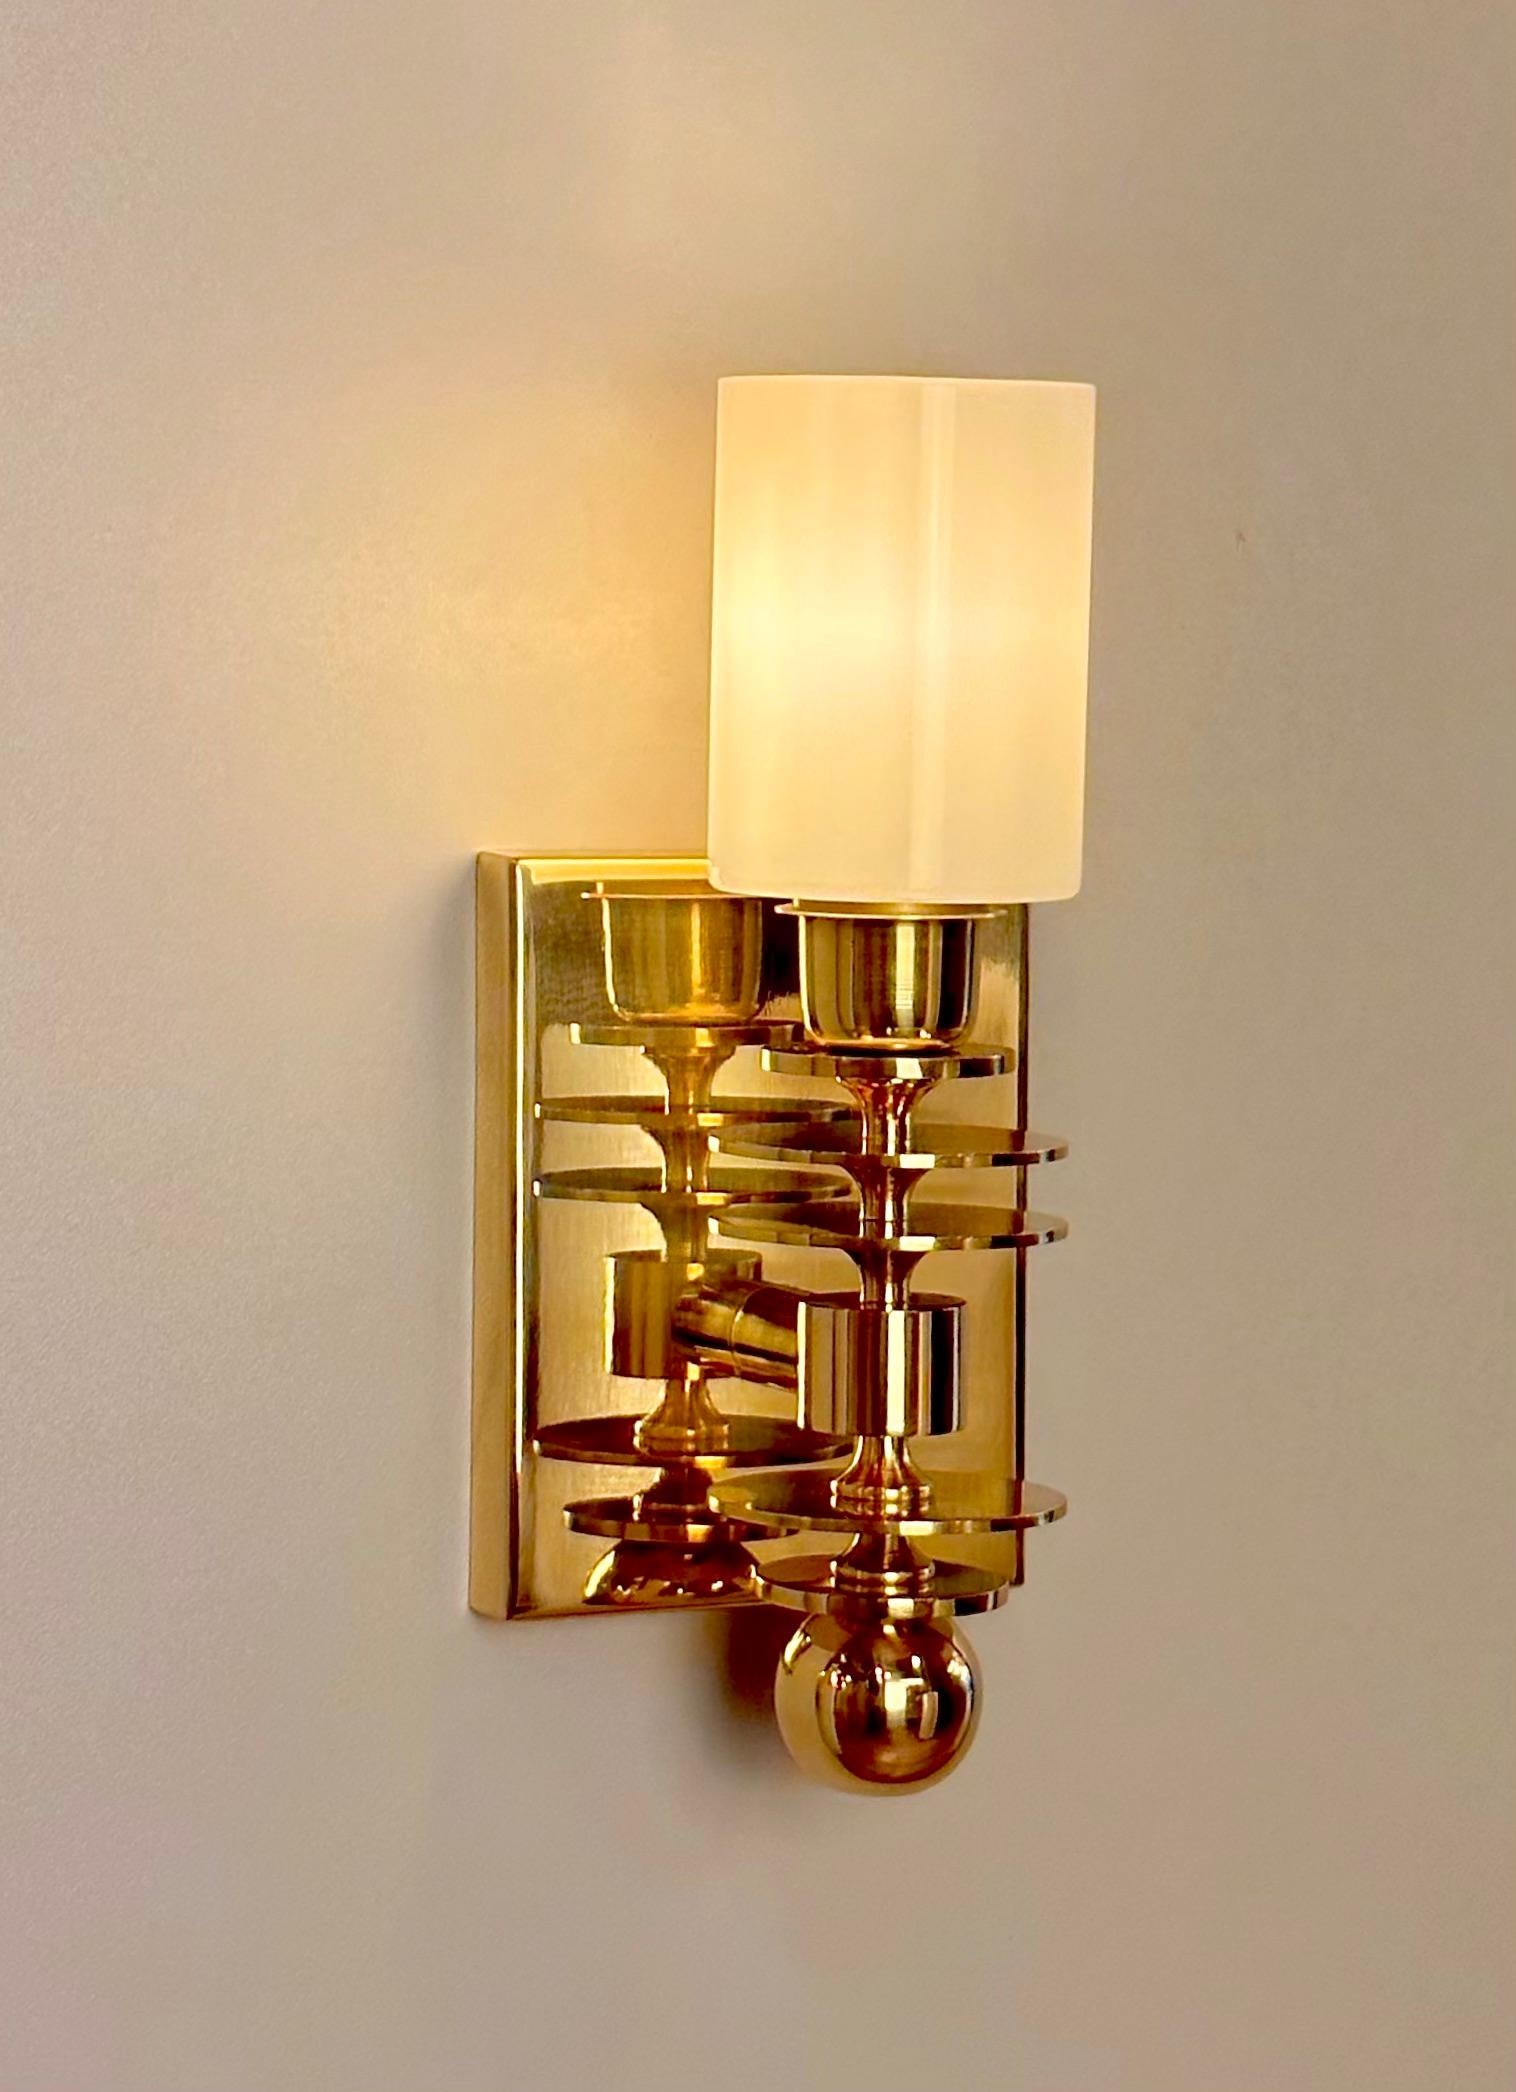 MARSALA brass wall sconce, a stunning example of mid-century modern style lighting. This exquisite wall sconce is crafted with meticulous attention to detail, featuring a body composed of different circle turned brass parts topped with a sleek